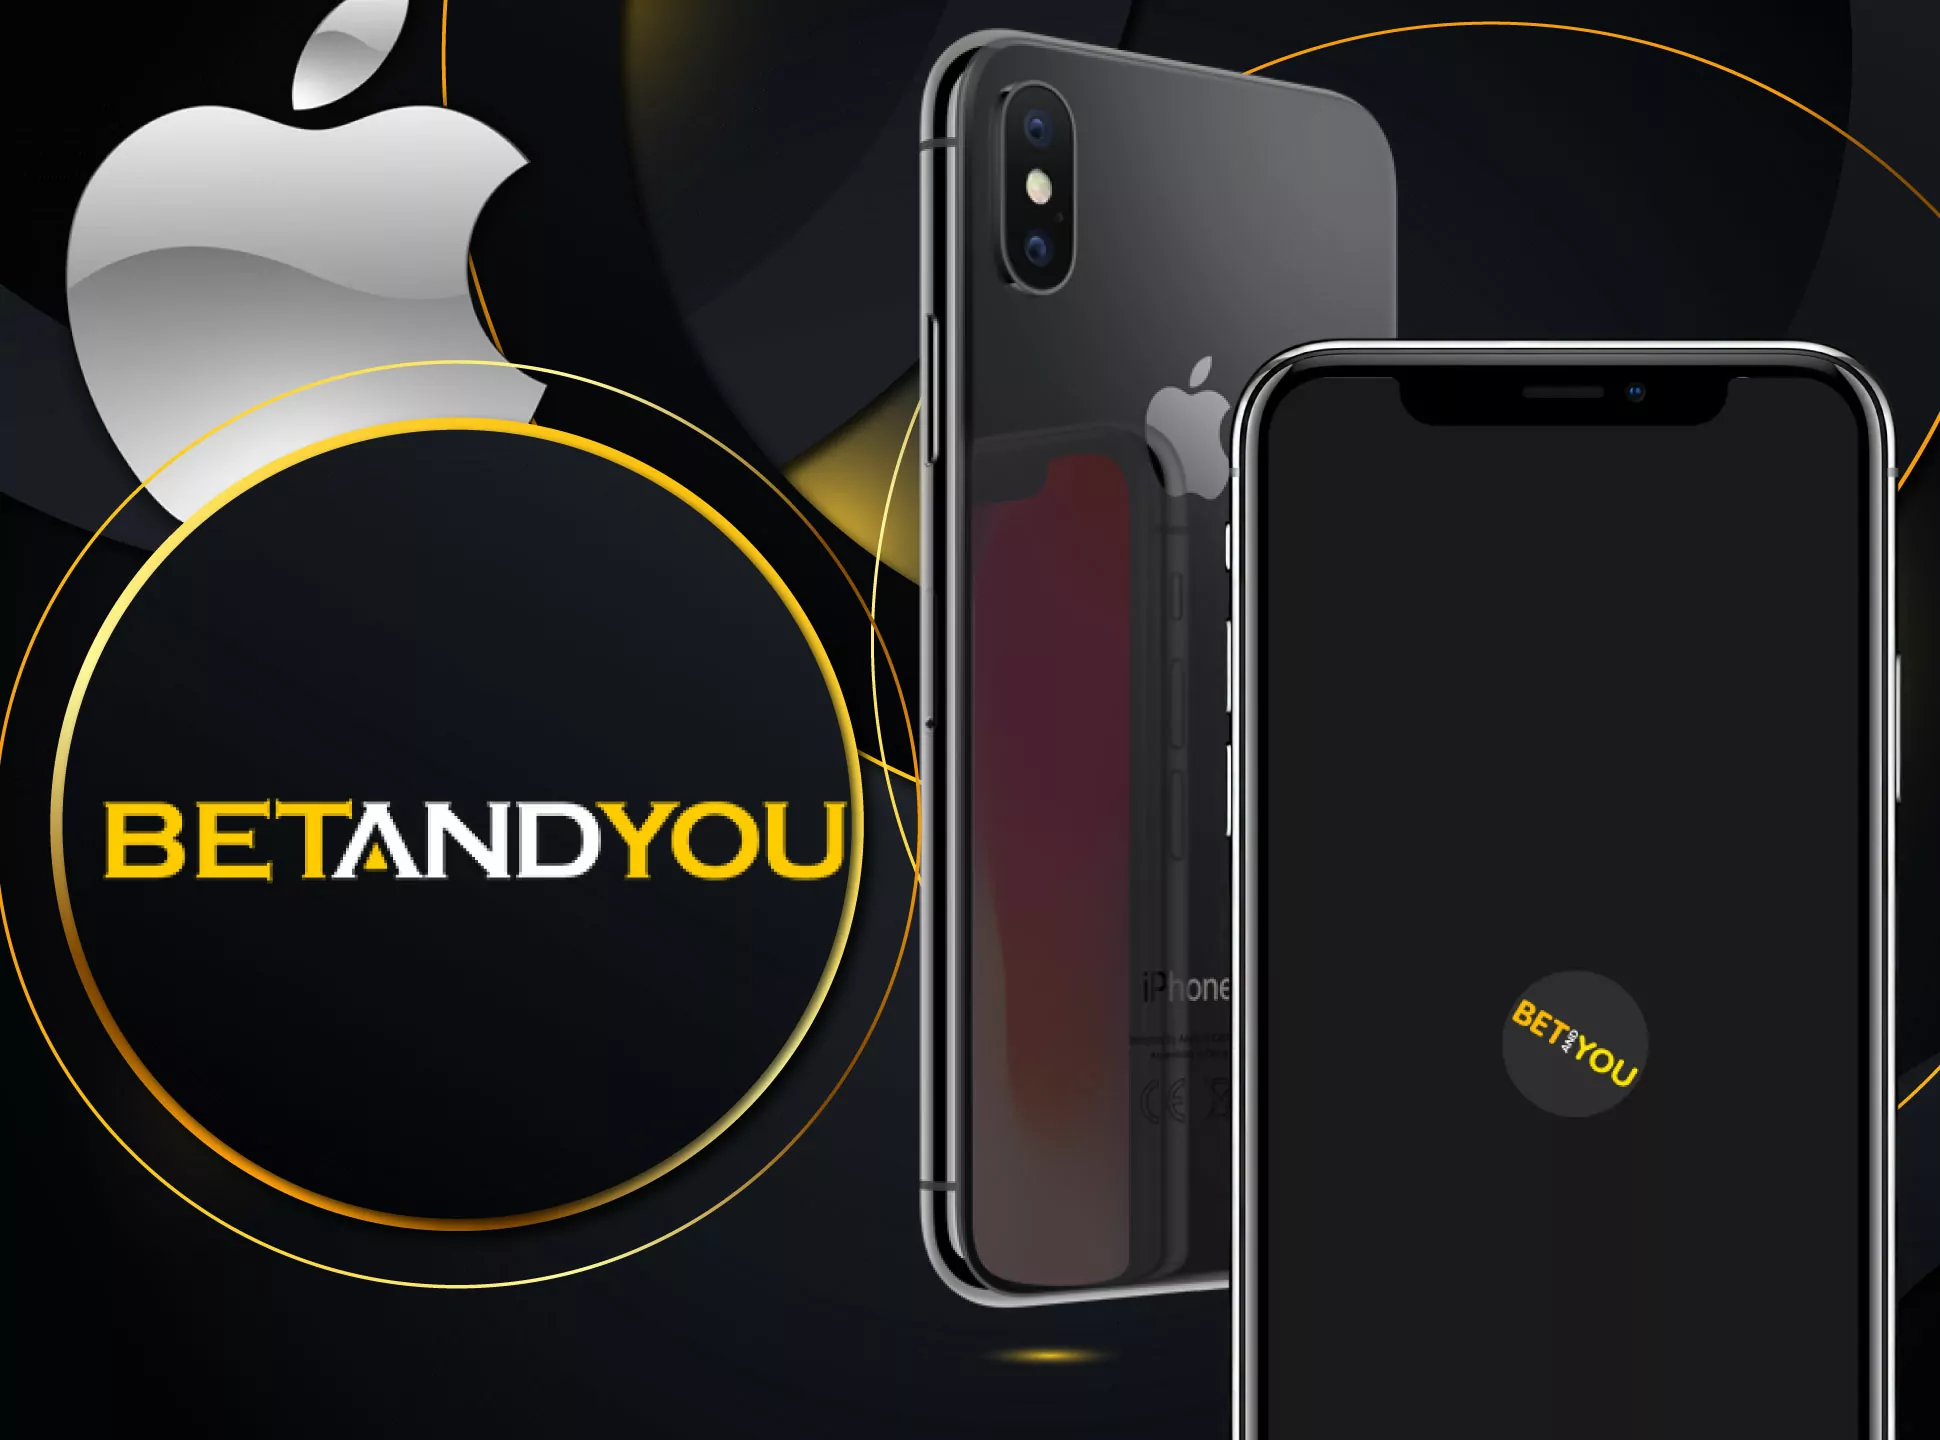 Betandyou casino app can be installed on iOS devices.